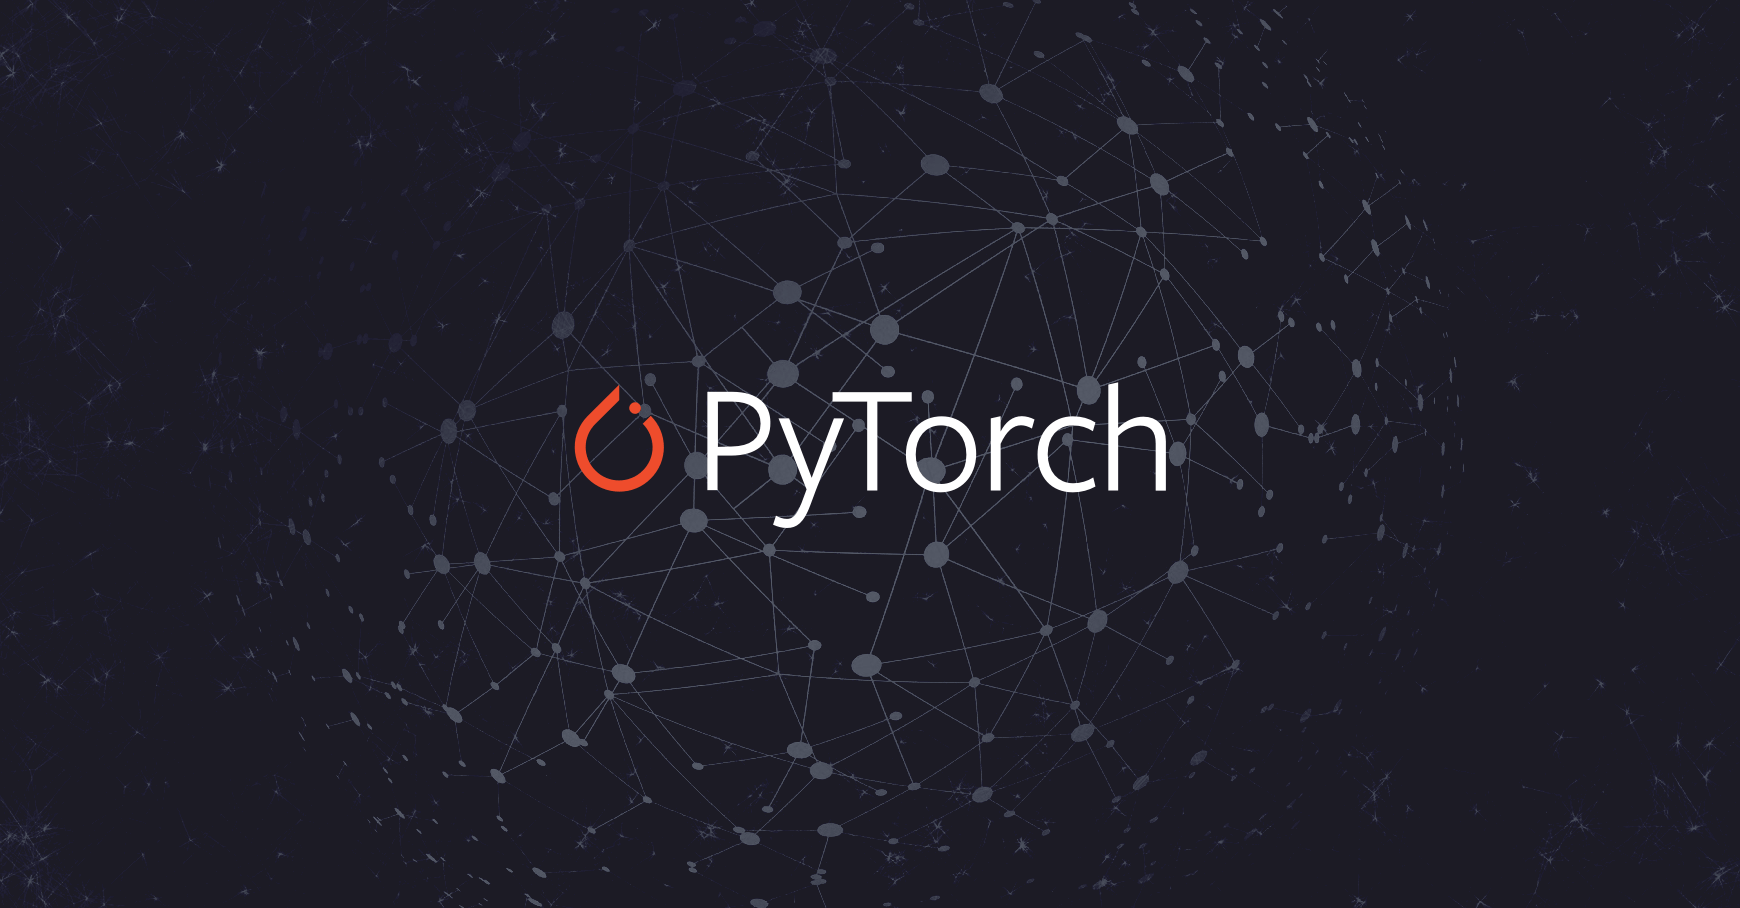 Facebook launches 3D deep learning library for PyTorch (i2tutorials)